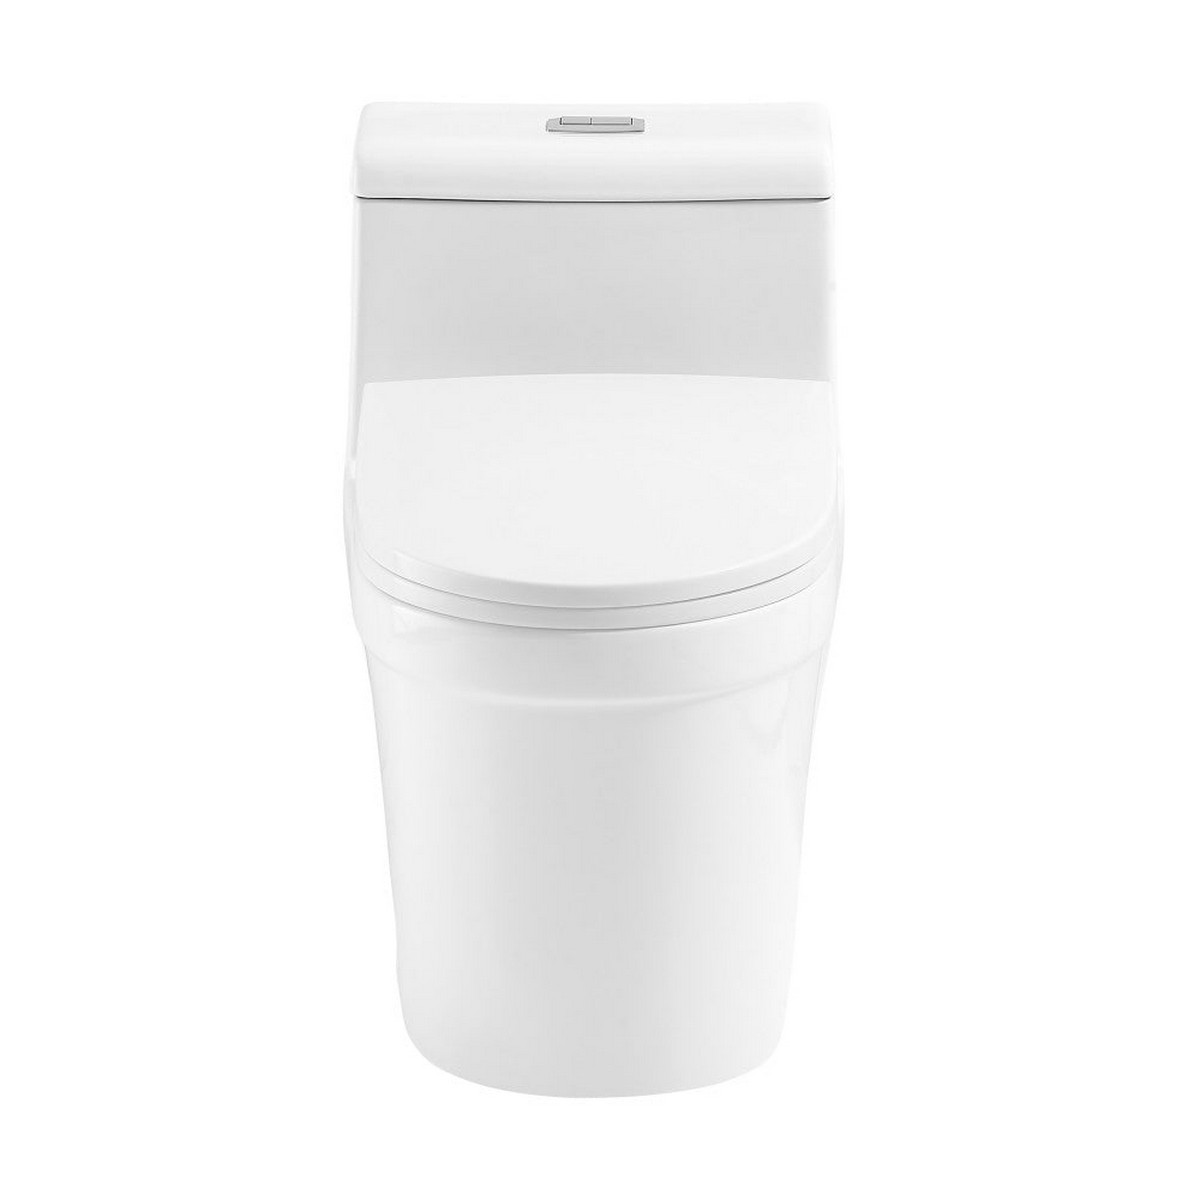 SWISS MADISON CT-1T266 KENT 1.1/1.6 GPF VORTEX DUAL-FLUSH ONE-PIECE ELONGATED TOILET IN GLOSSY WHITE